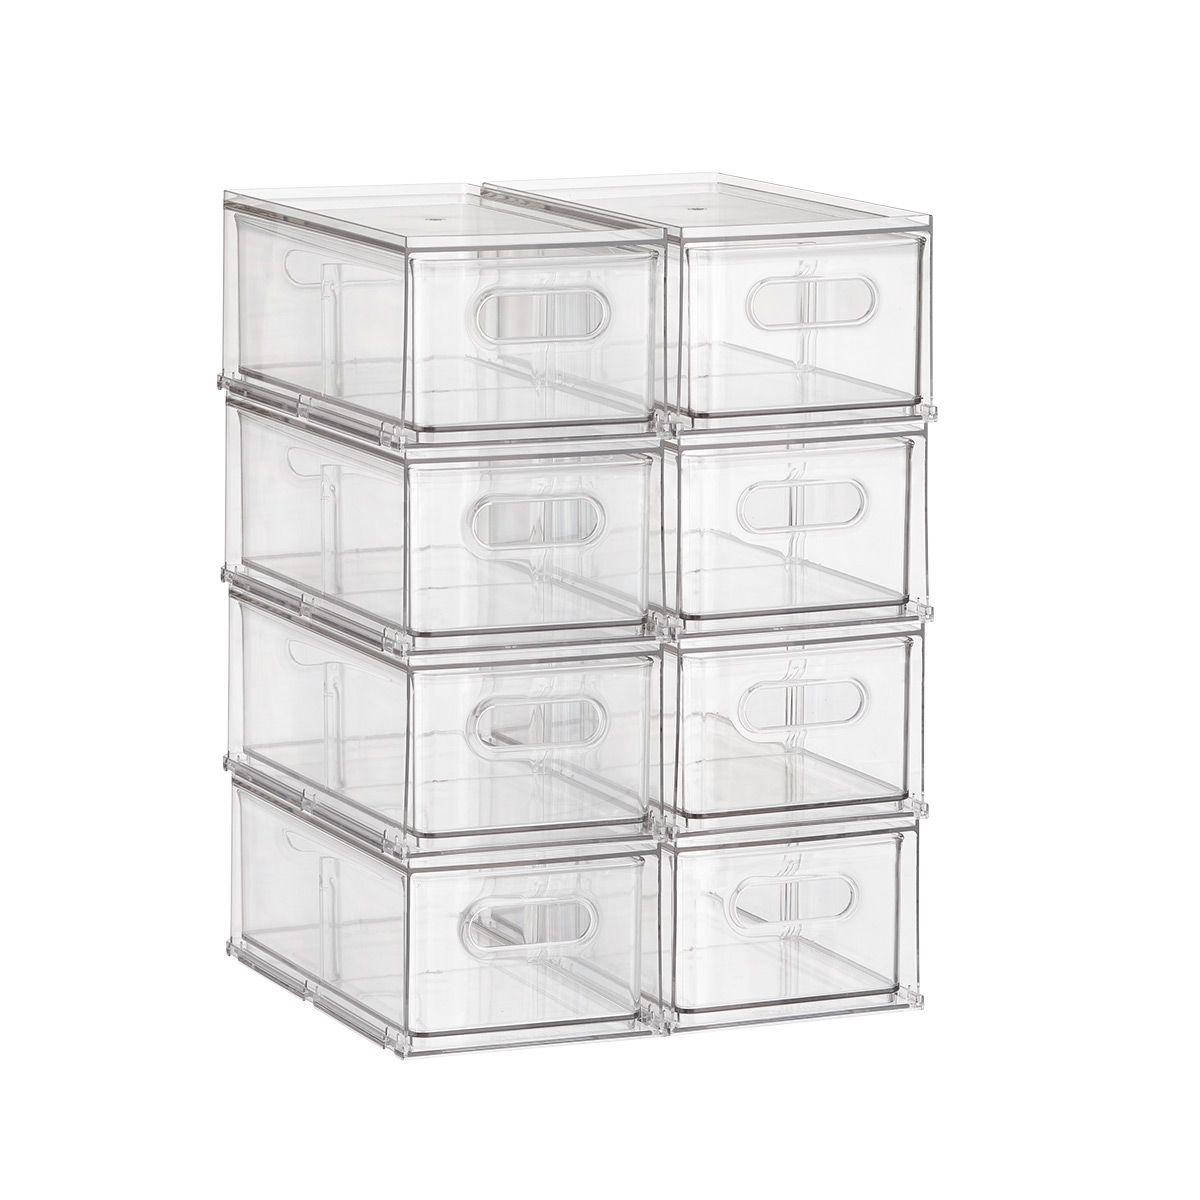 Case of 8 T .H .E . Divided Fridge Drawer | The Container Store